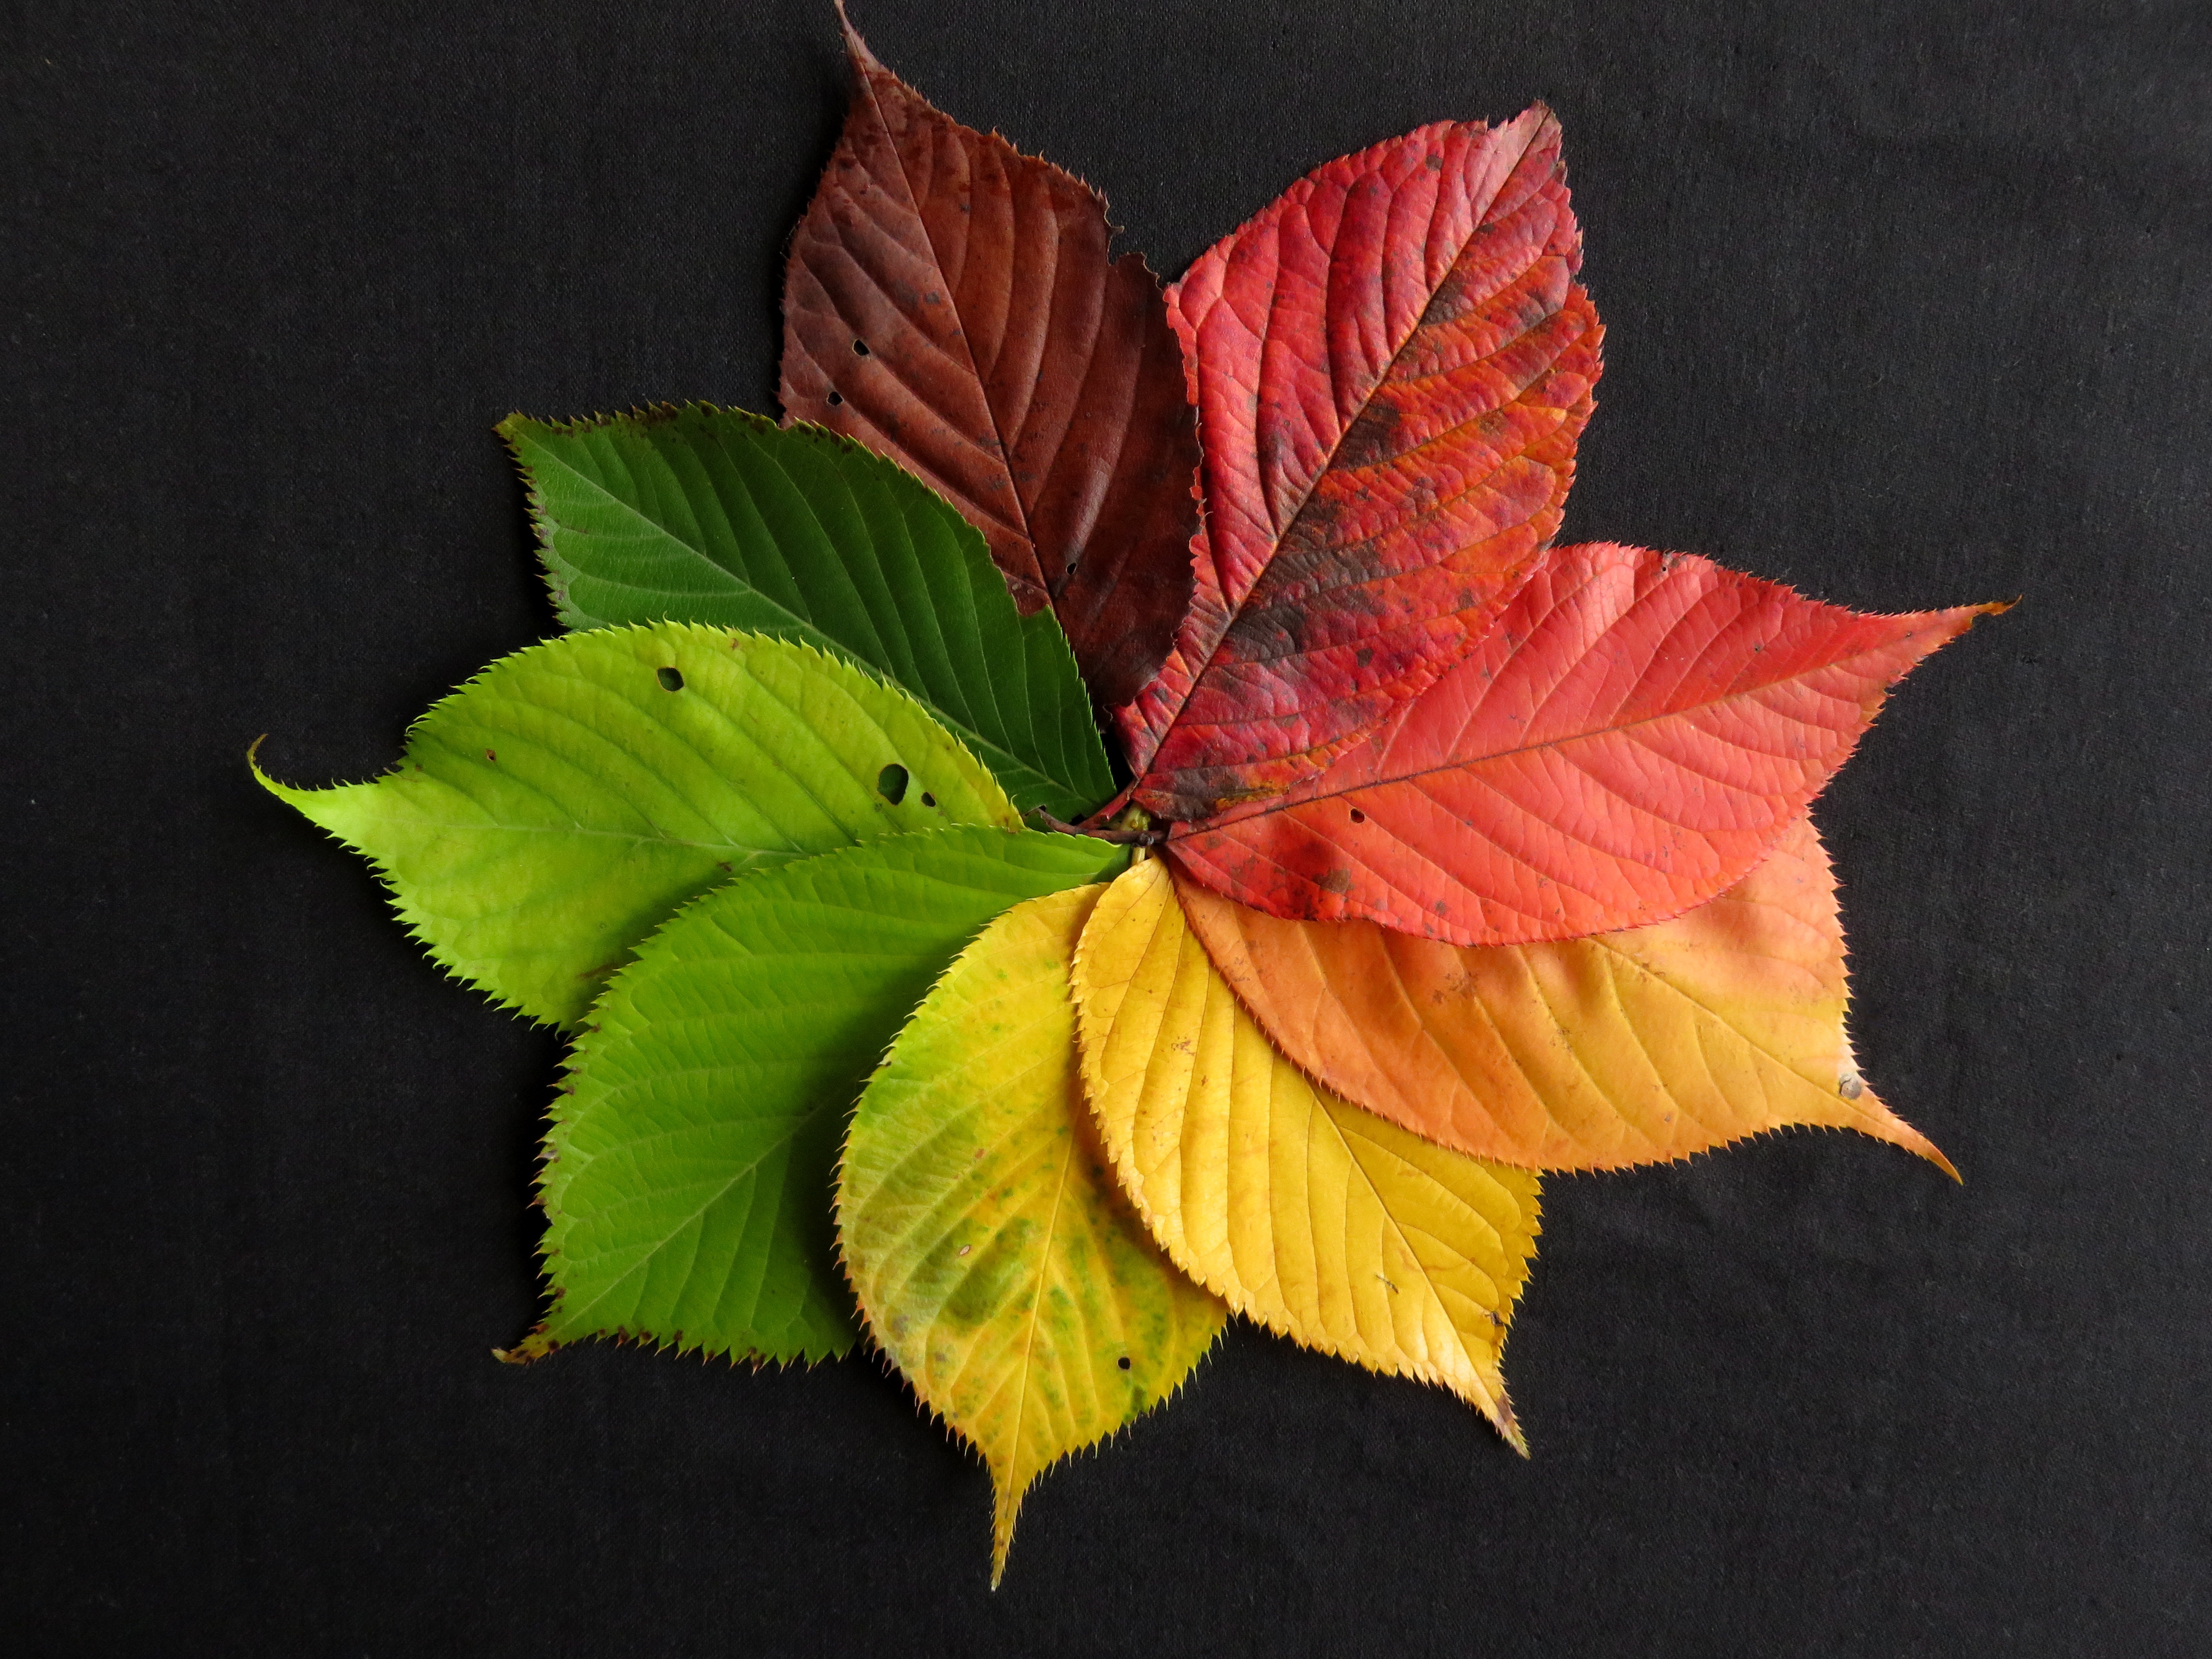 Change in leaf color by season